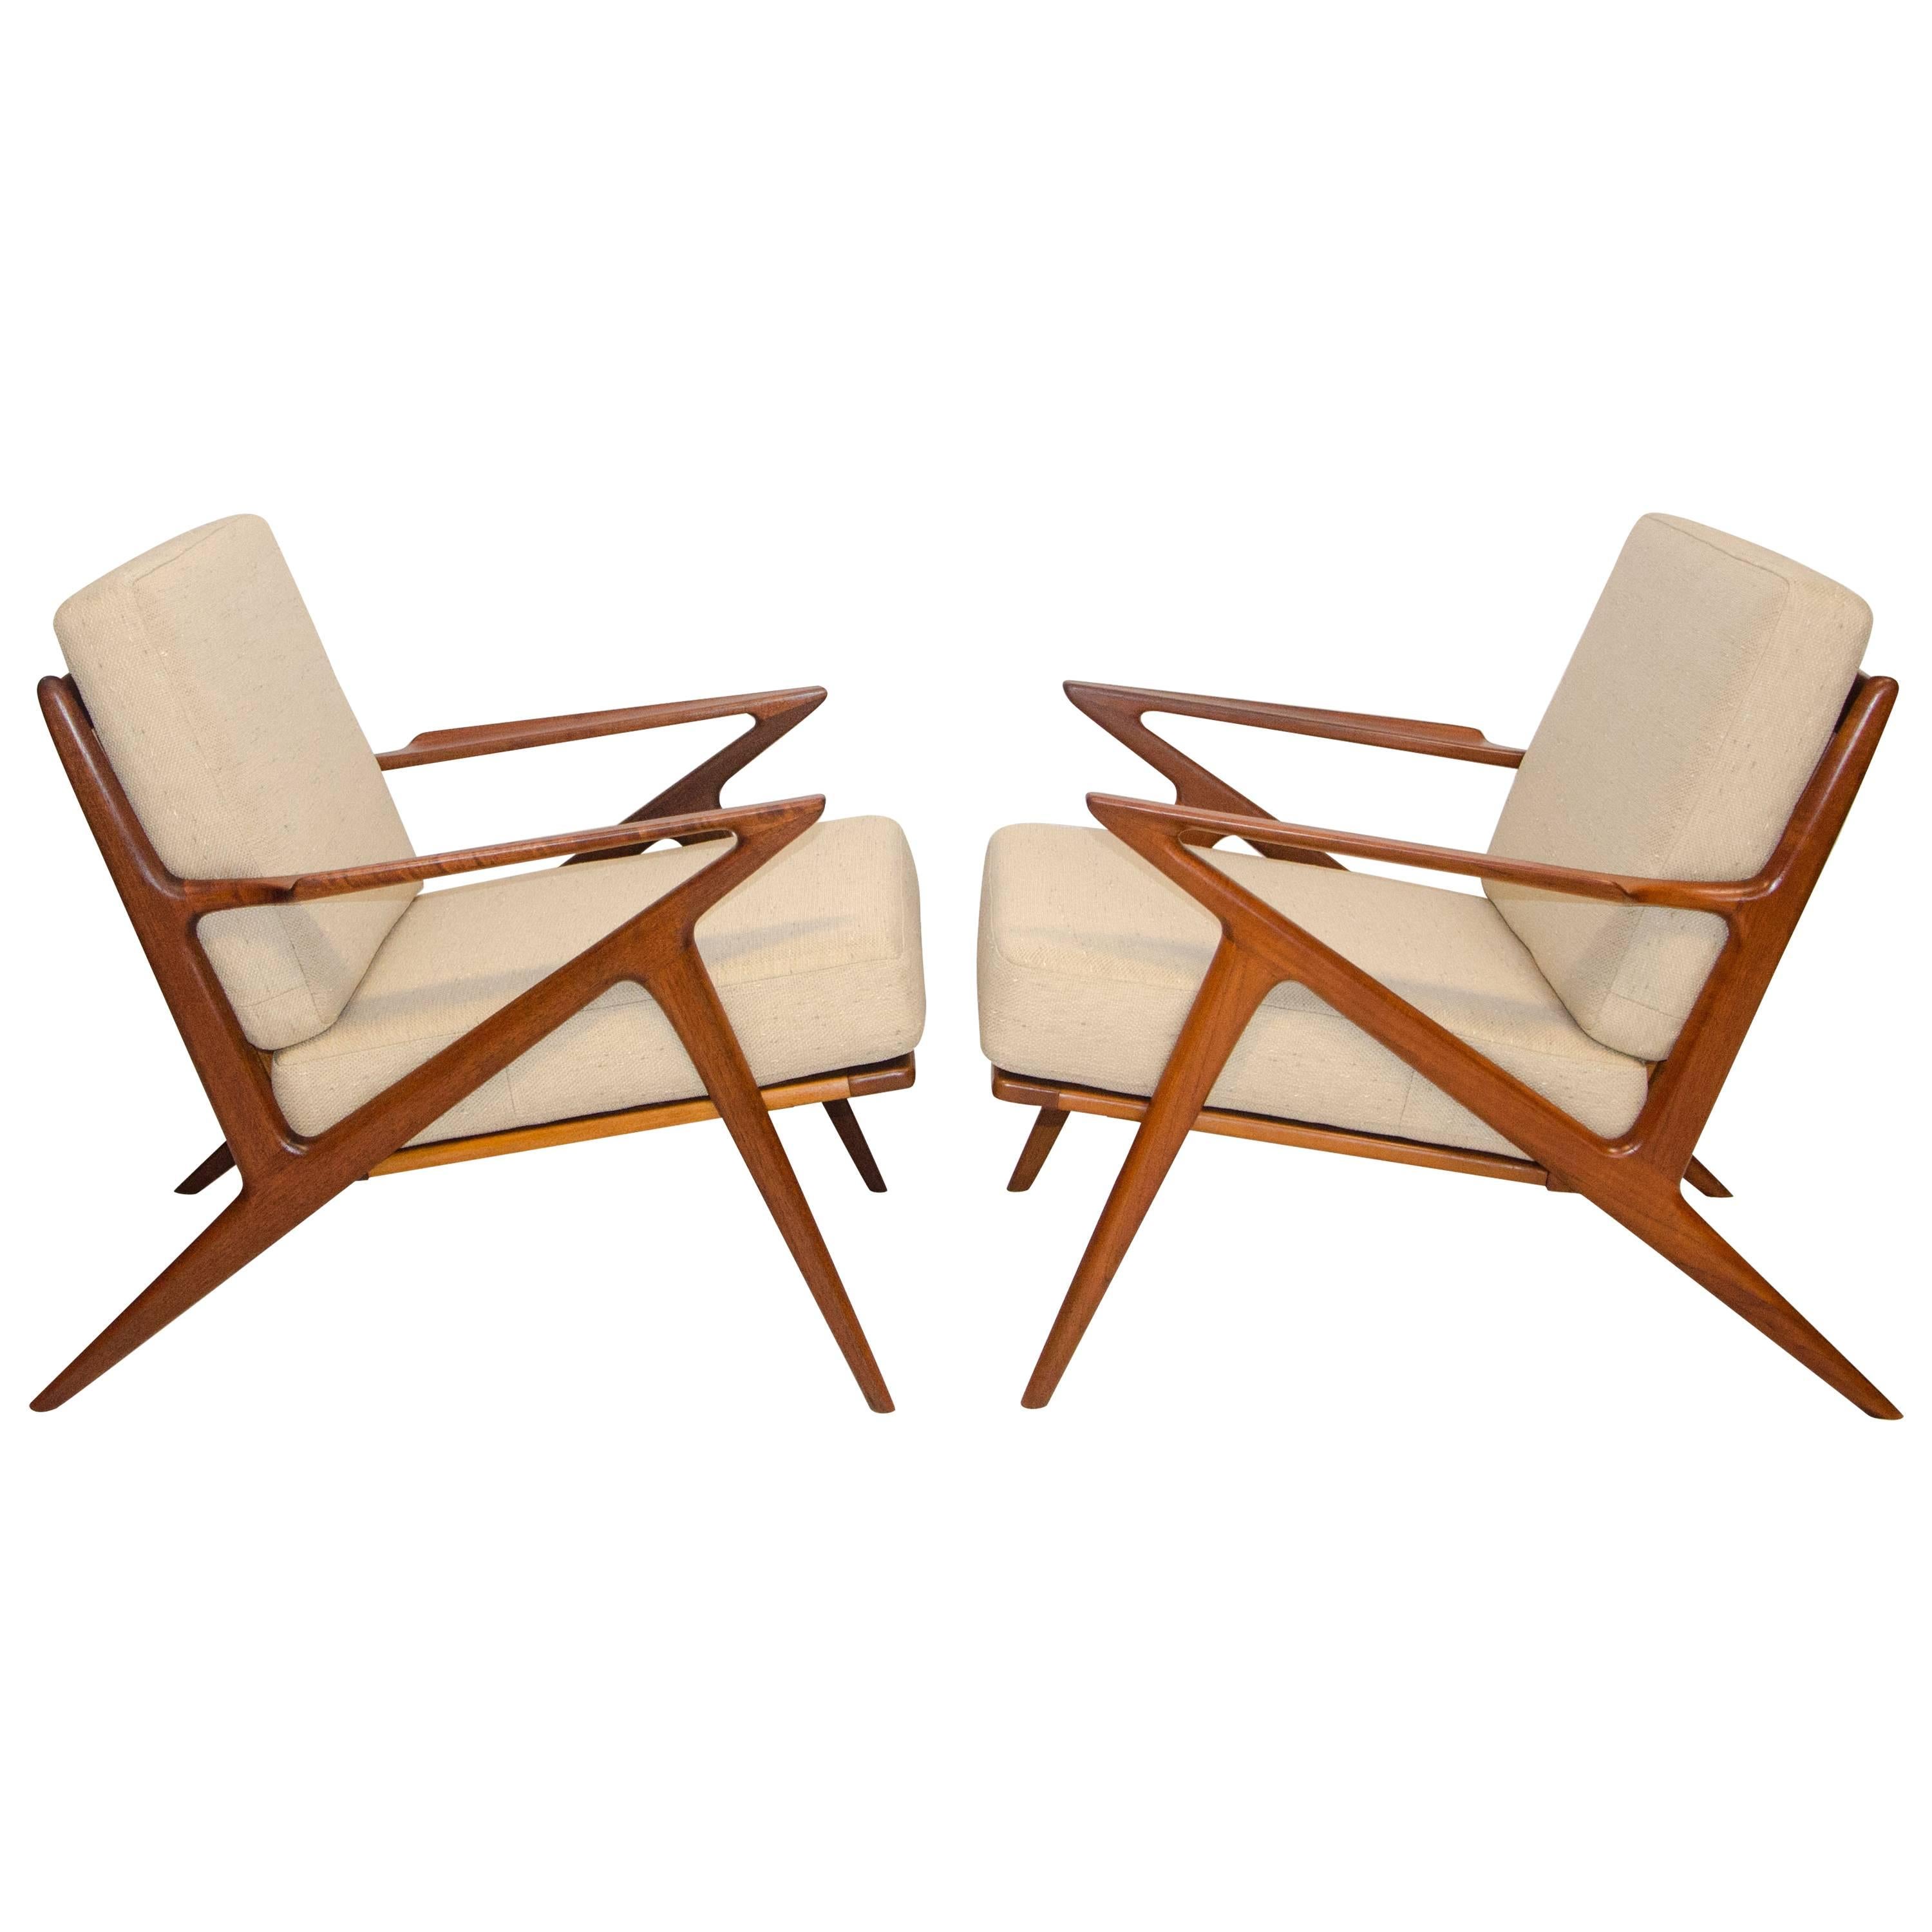 Pair of Danish Teak Z Lounge Chairs by Poul Jensen for Selig